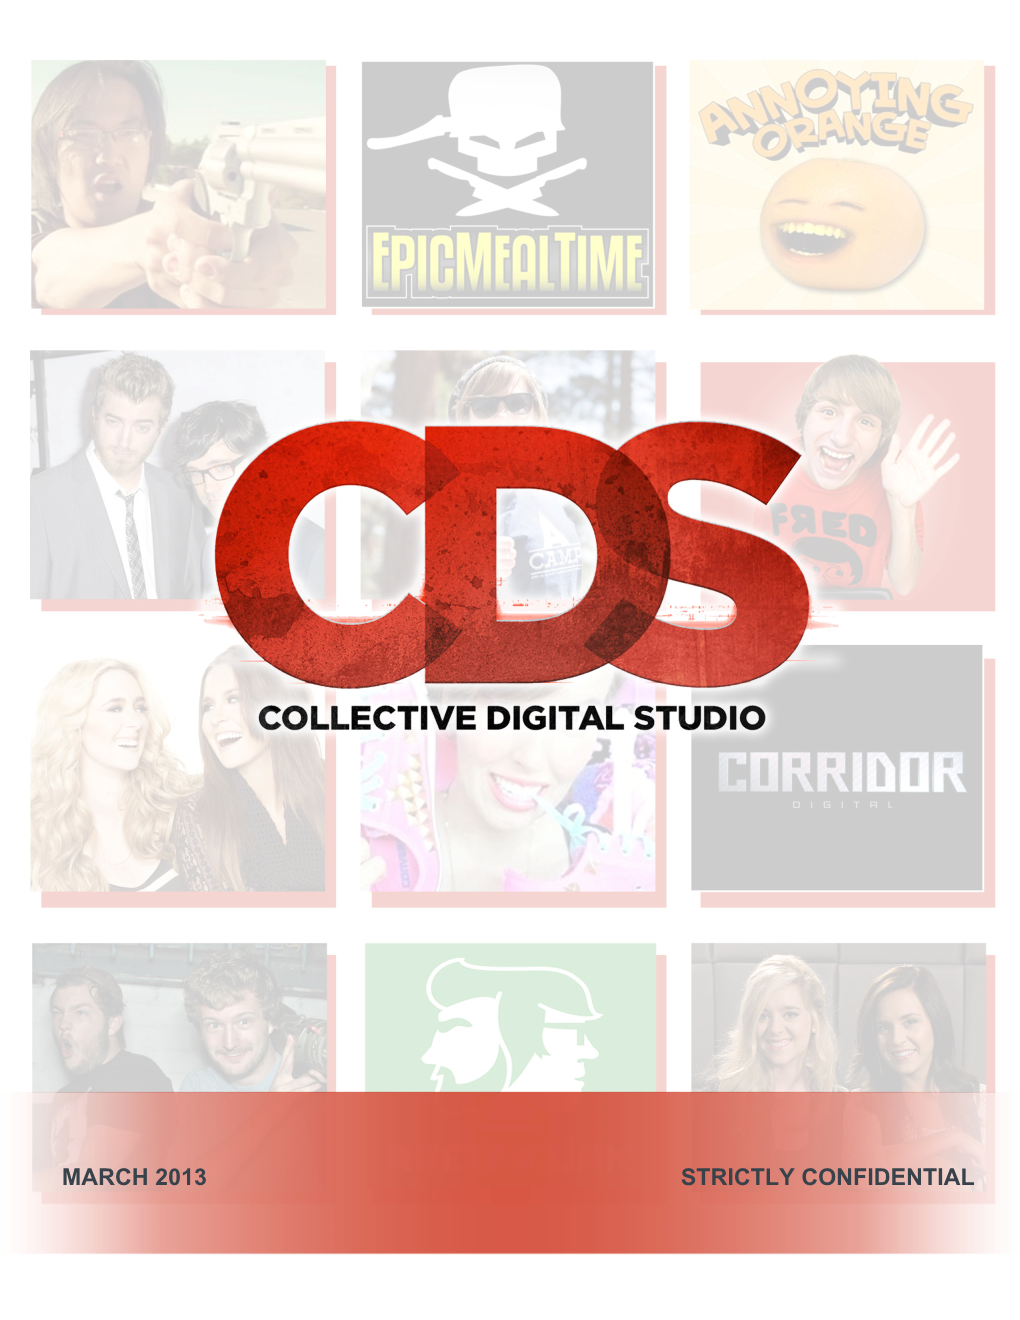 Collective Digital Studio (Collectively with Its Subsidiaries, “CDS” Or the “Company”)